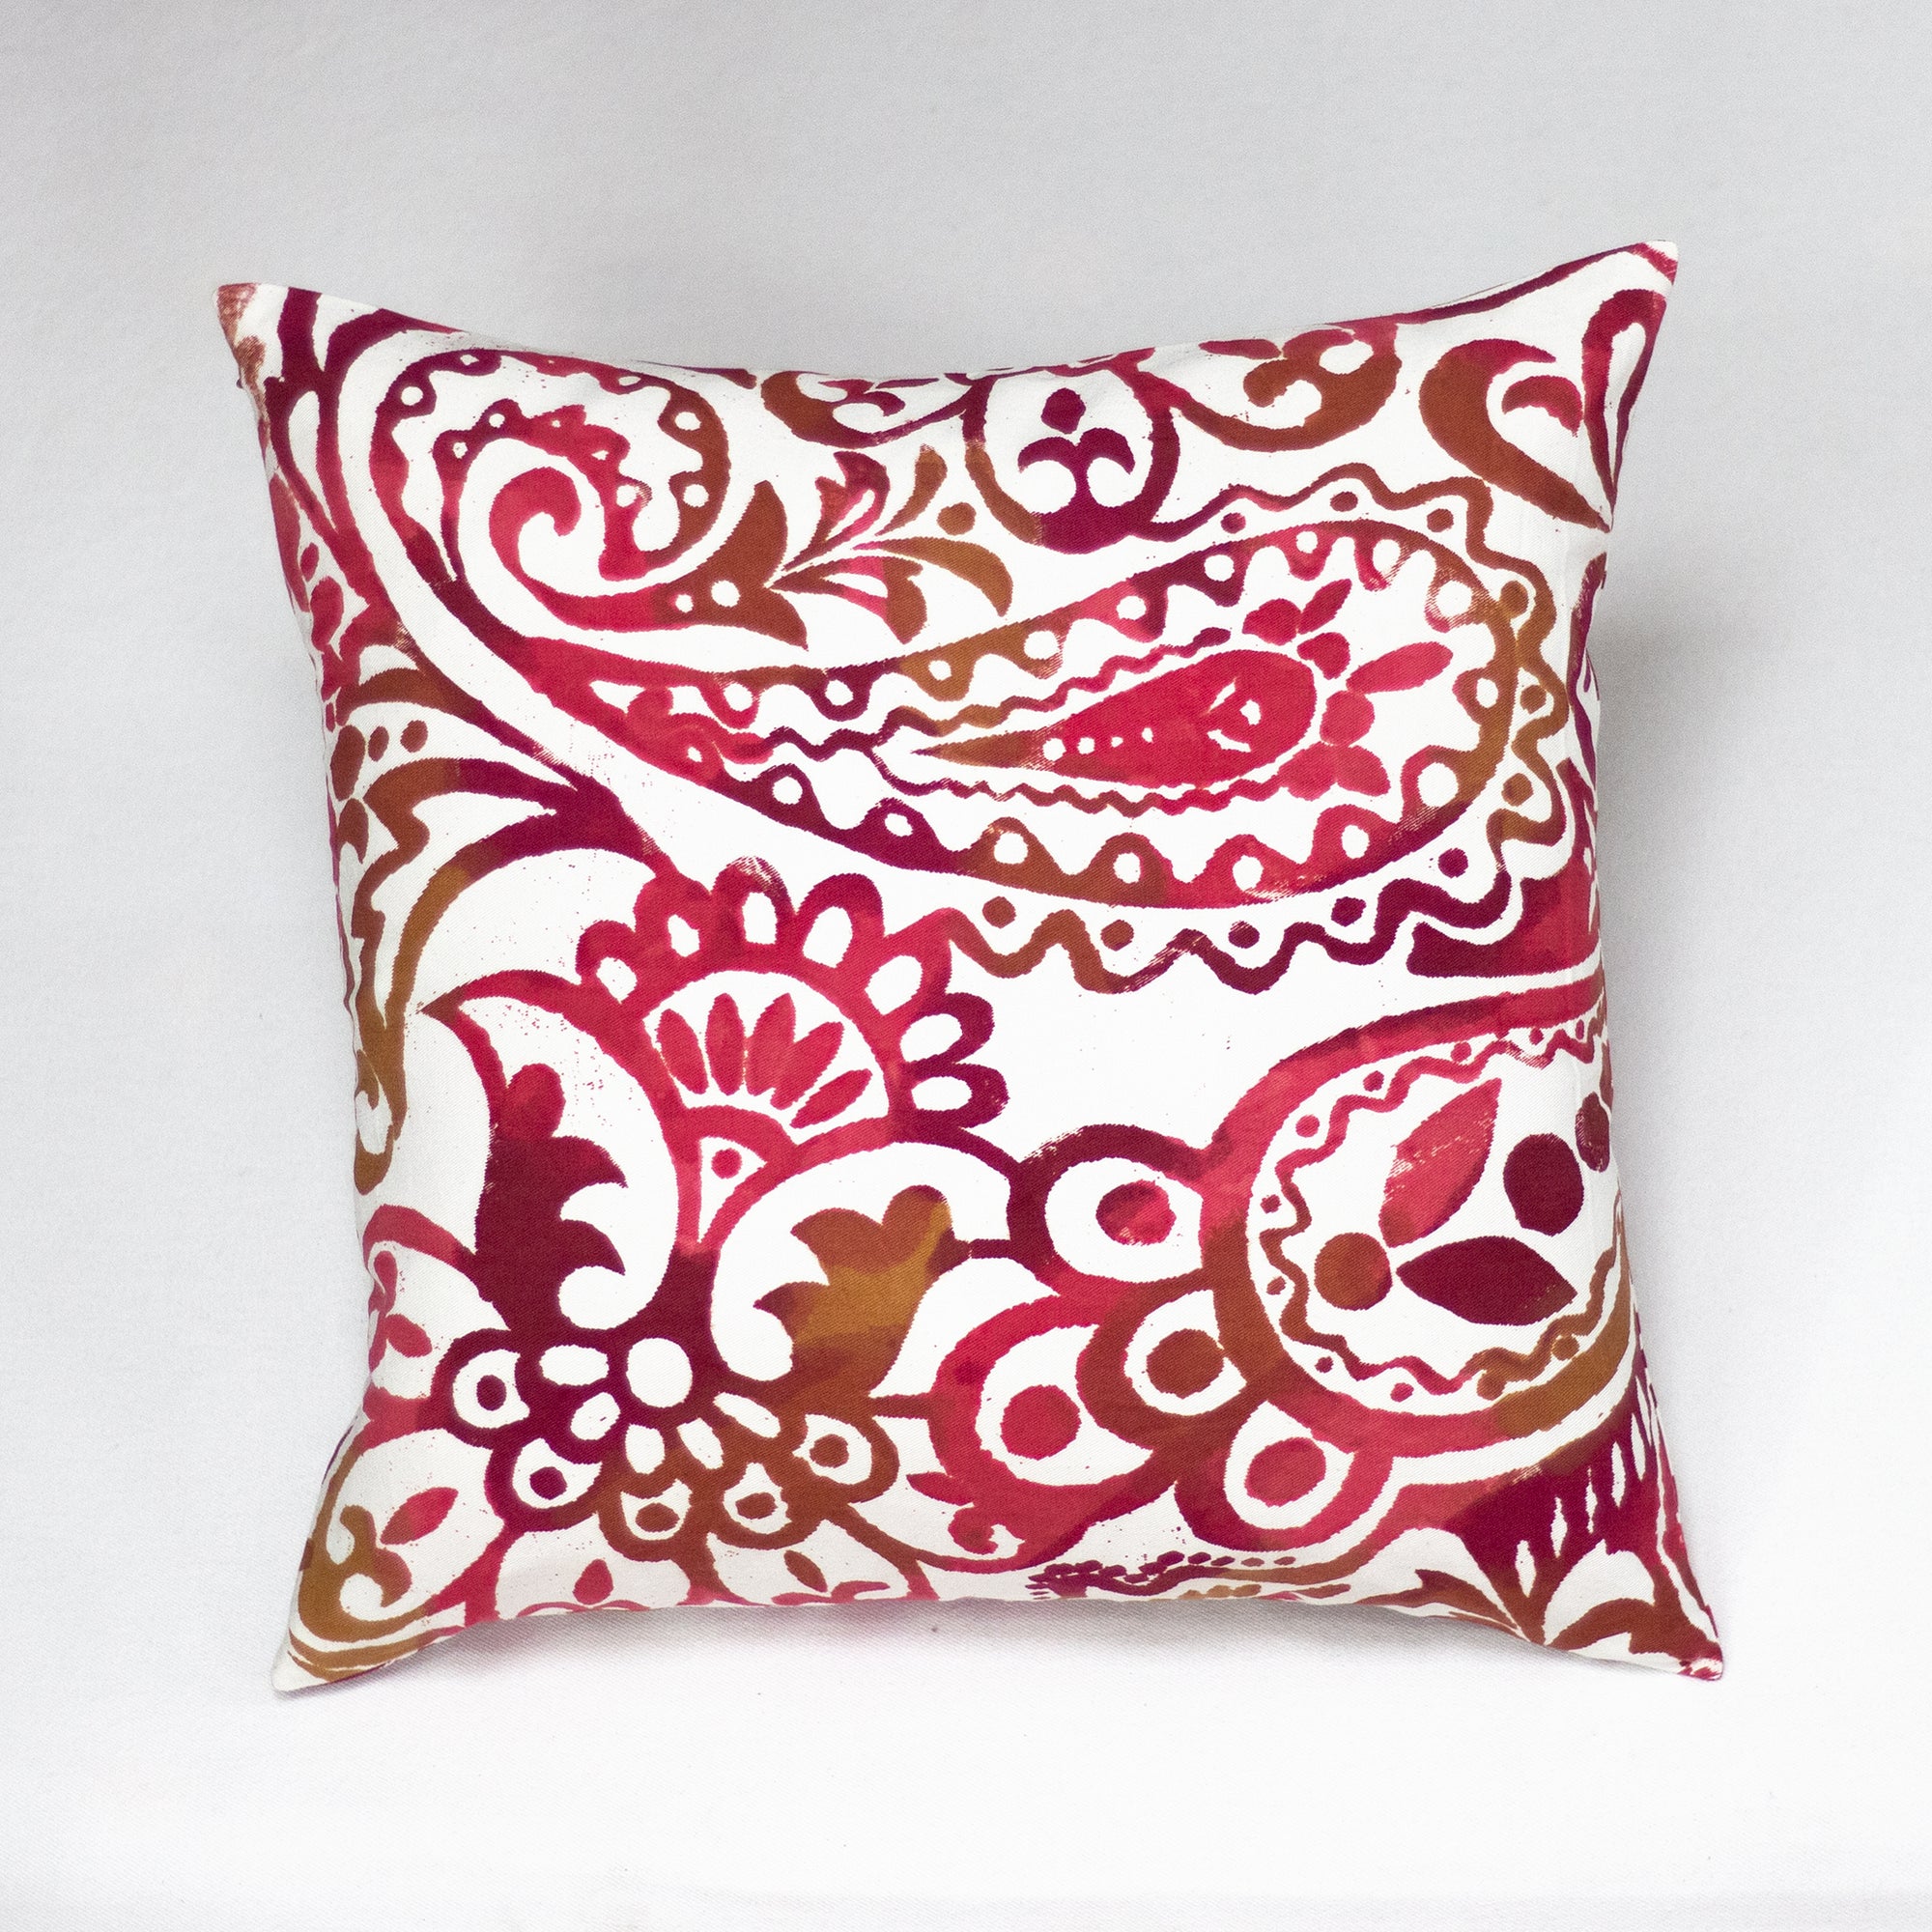 Hand Painted Accent Pillow Cover - Boundary Waters - Red & Gold